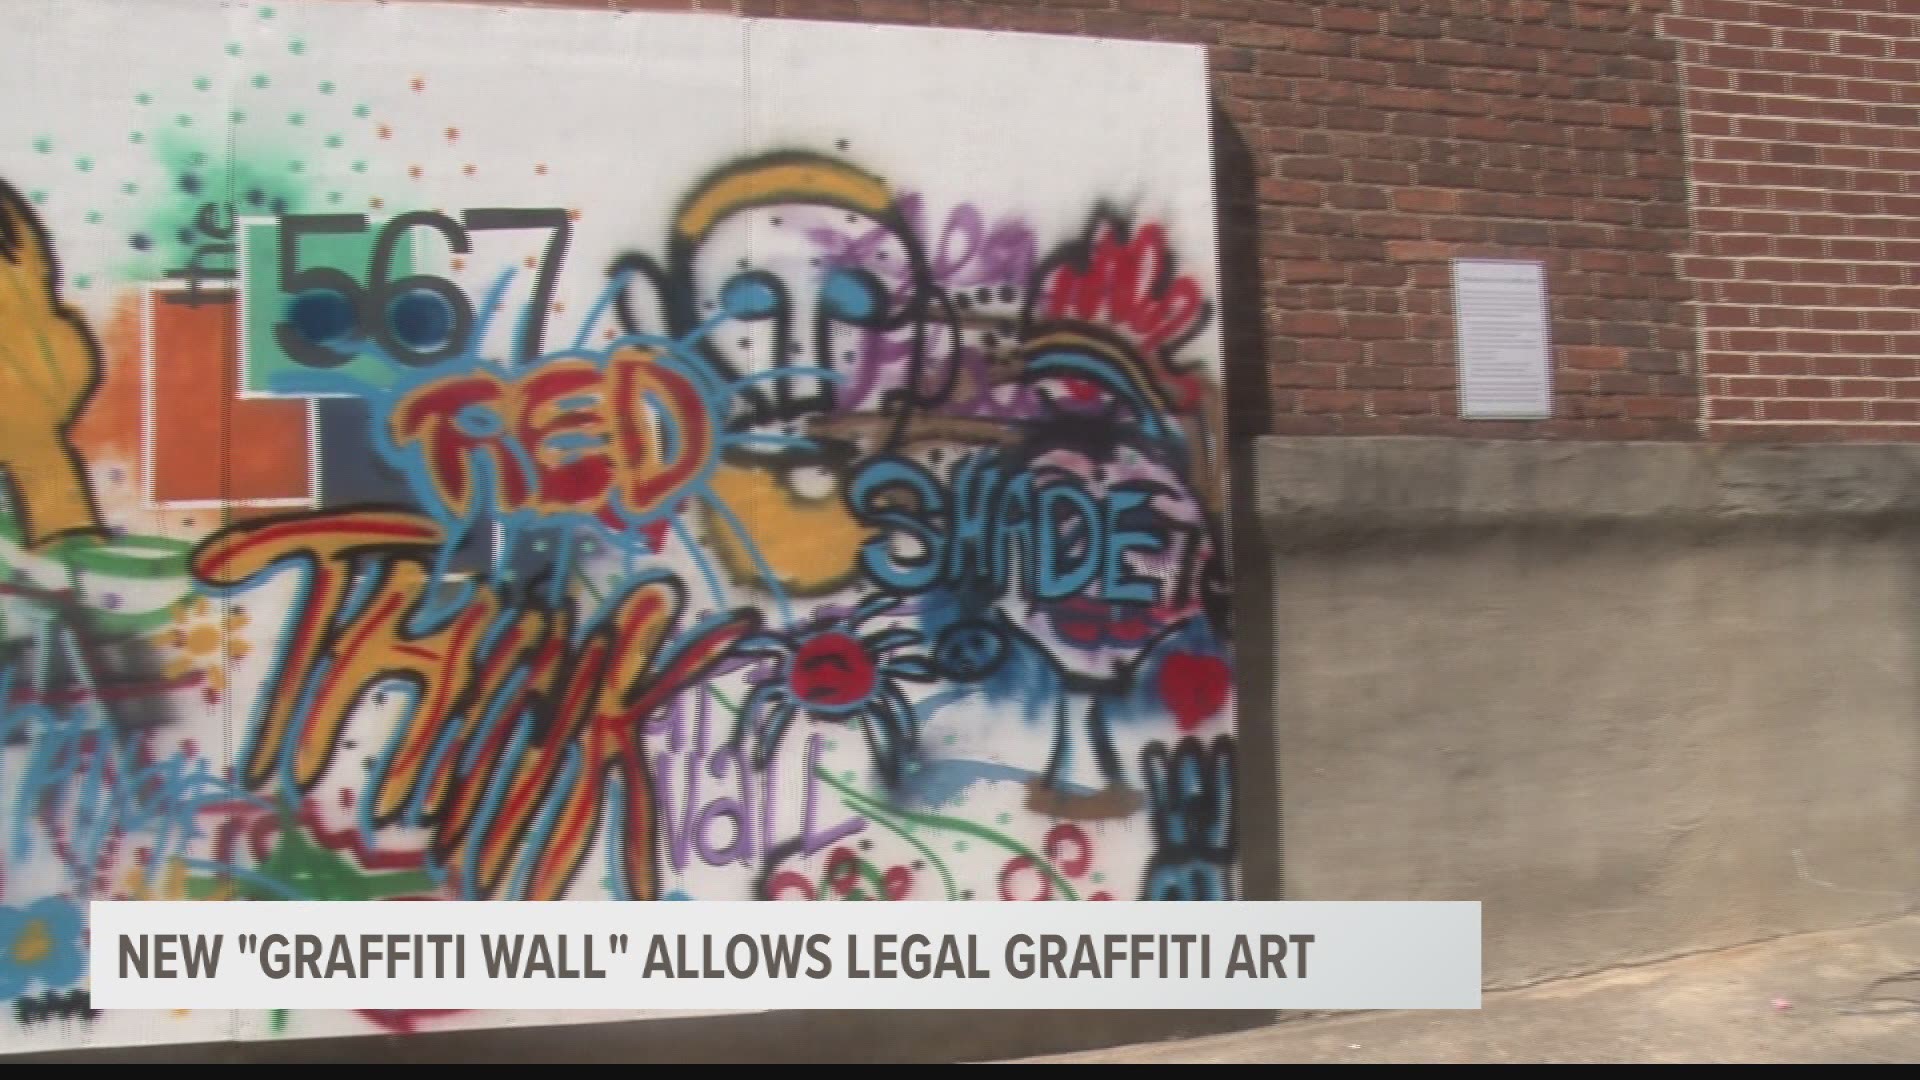 New "Graffiti Wall" hangs in Macon to encourage expression and cut down on vandalism